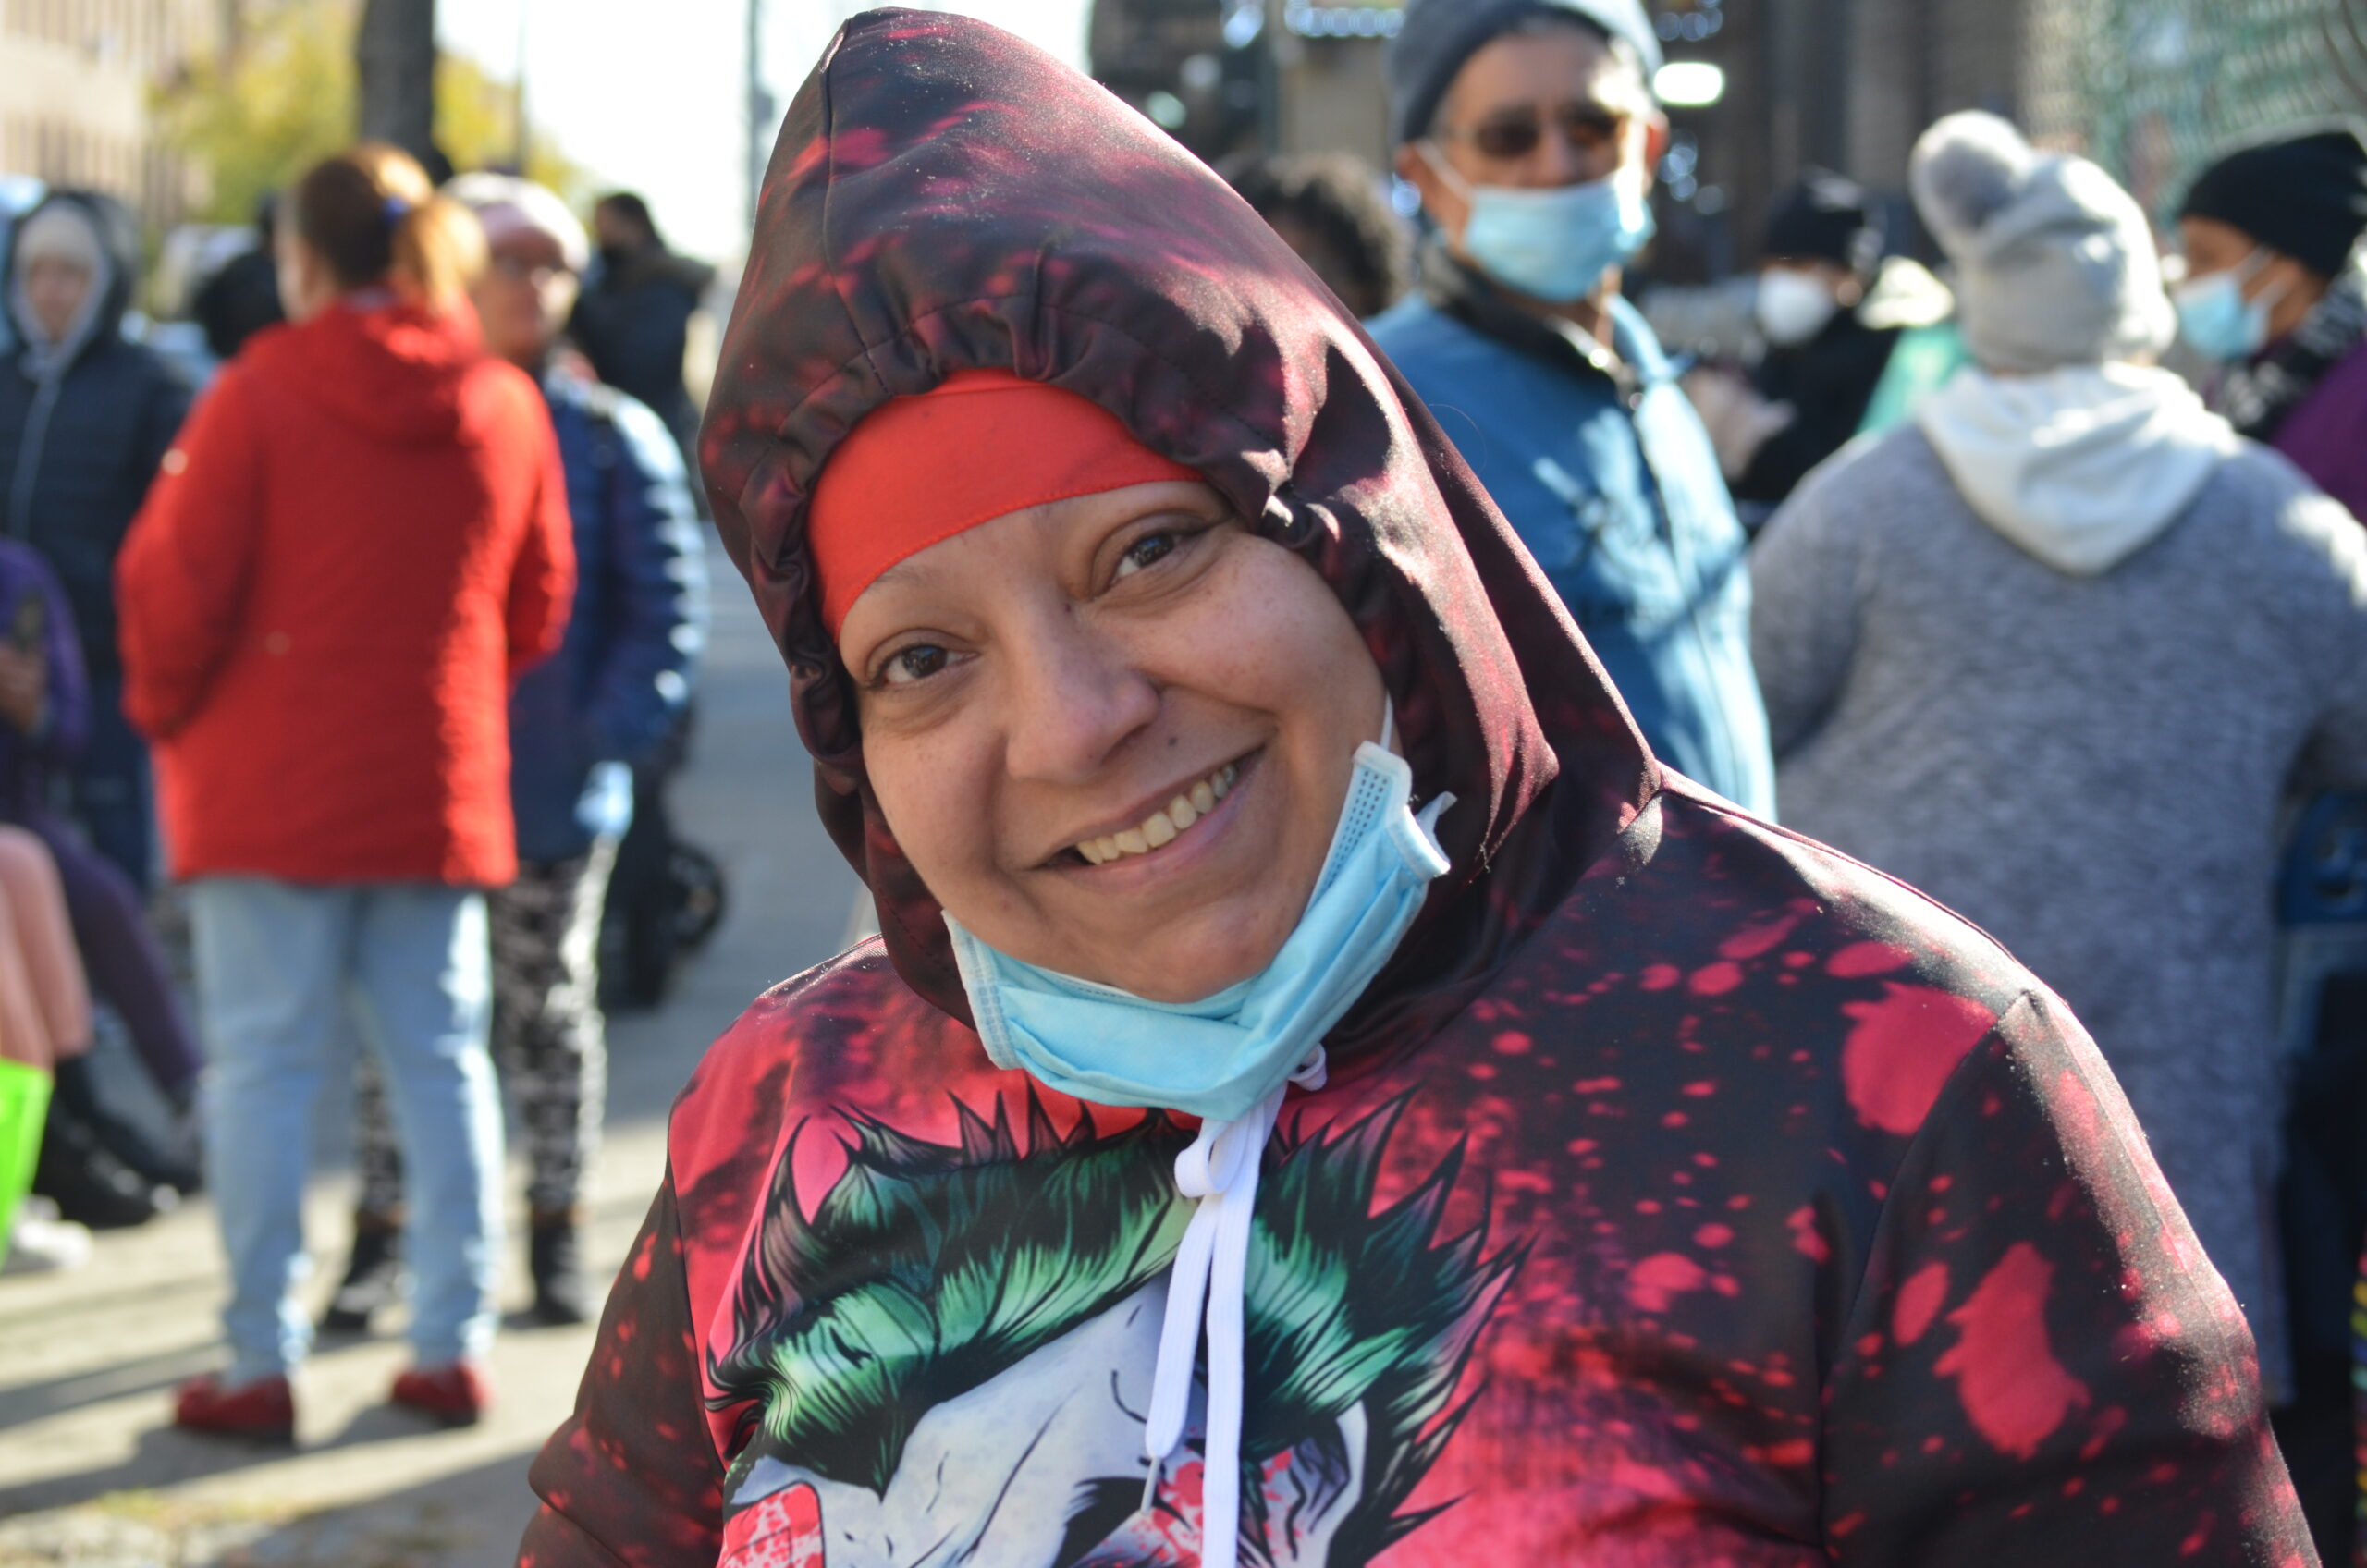 A woman wearing a hooded sweatshirt smiles while many people stand behind her in a line.